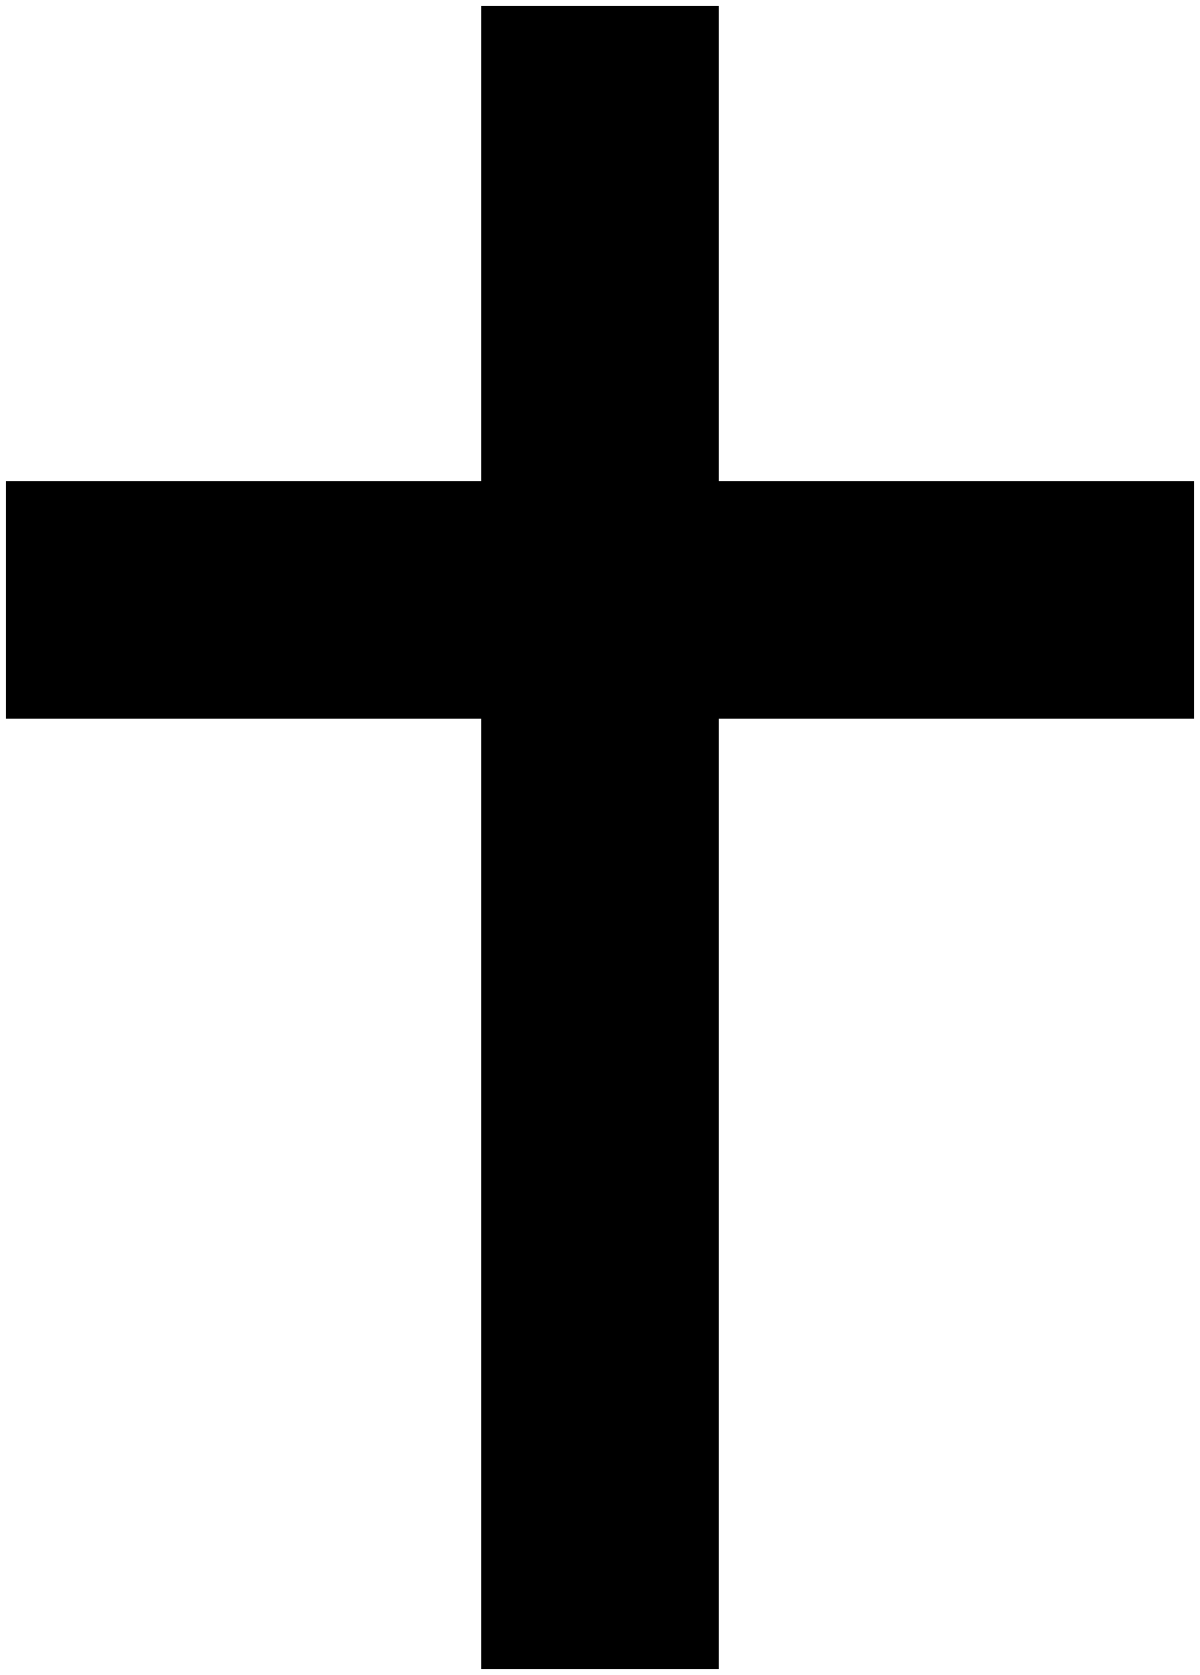 Two black rectangular line segments intersecting, one horizontal, one vertical; the intersection is at the center of the horizontal segment and roughly a third from the top of the vertical segment